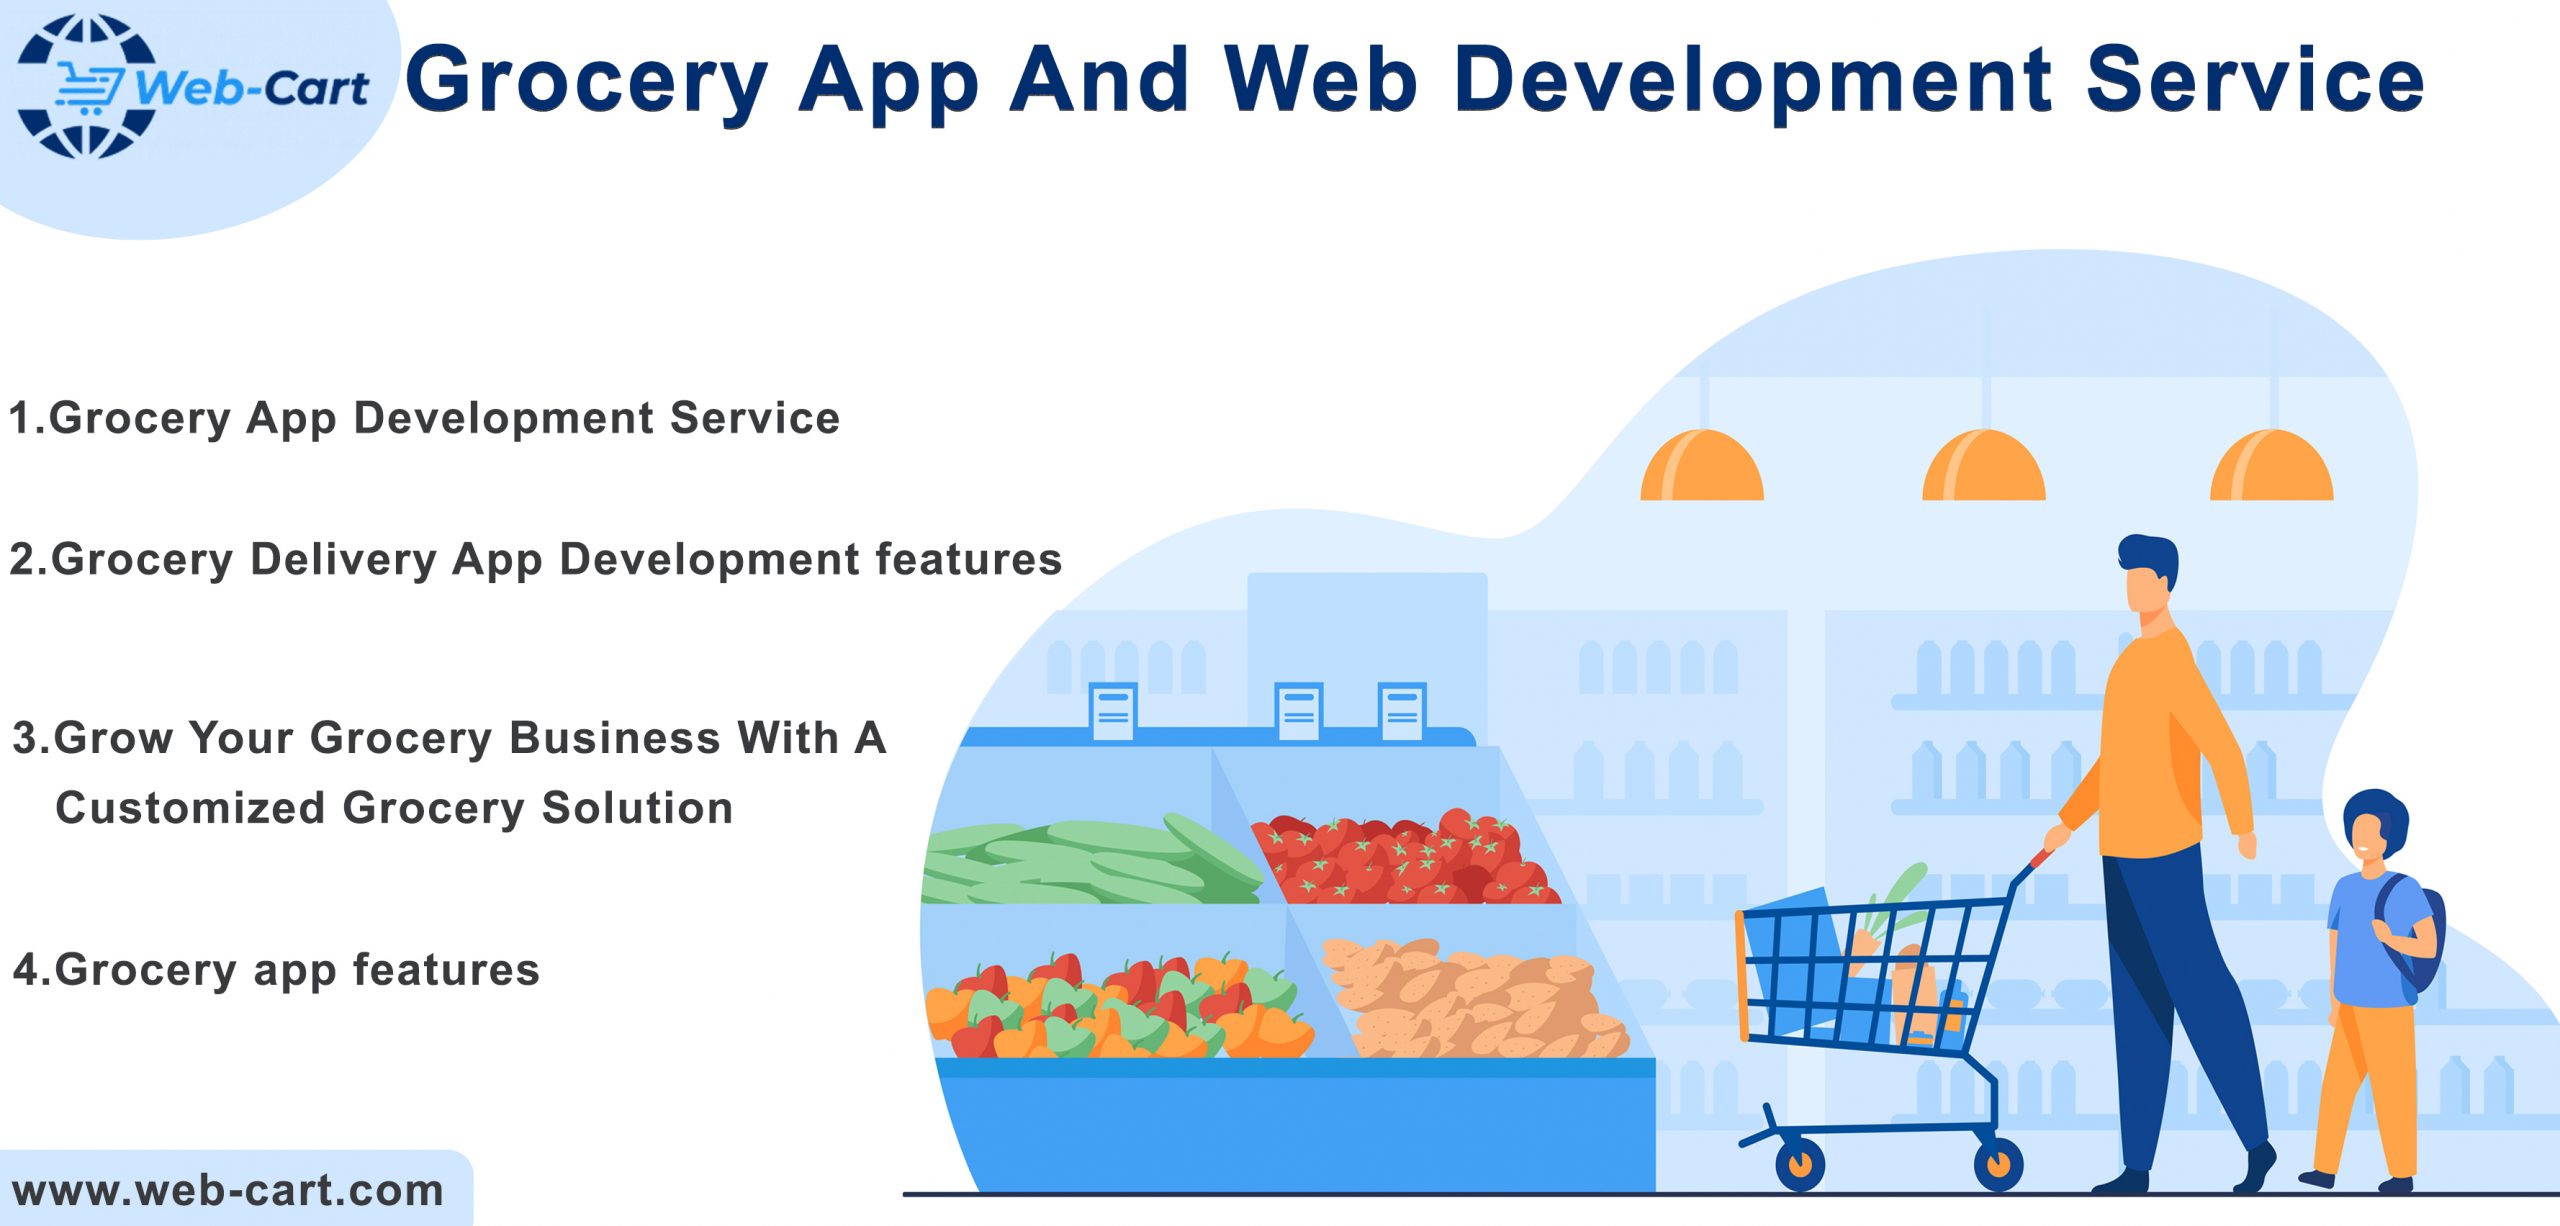 Grocery App And Web Development Service: Be Present In Every Household - Webcart